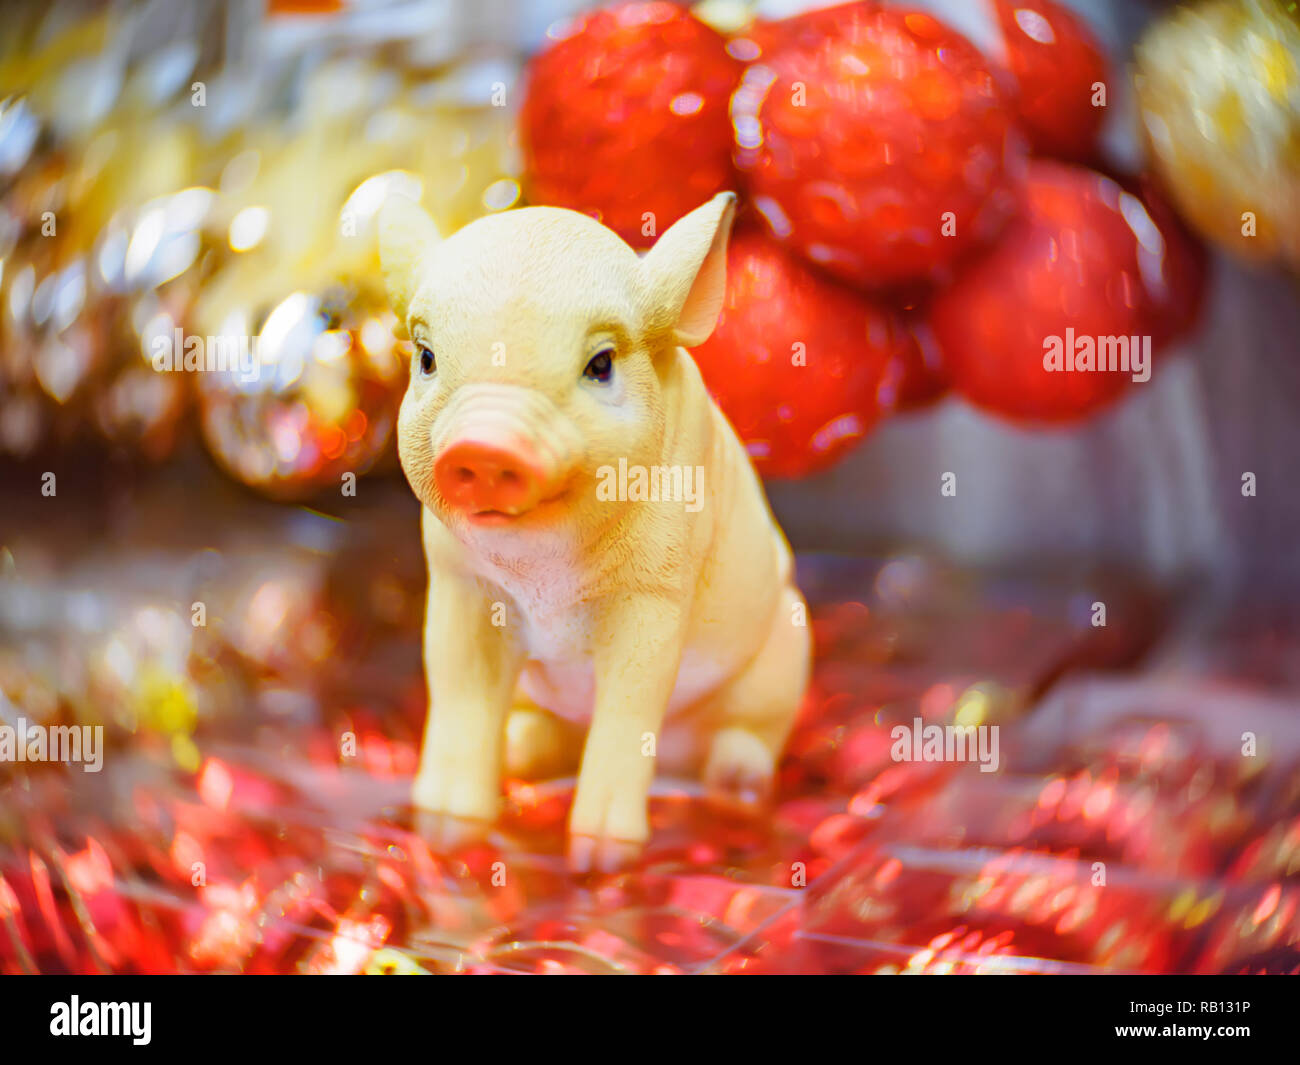 Christmas decorations and toys. Christmas and New Year festive soft-focused background with a pig as a symbol of the new year. Stock Photo